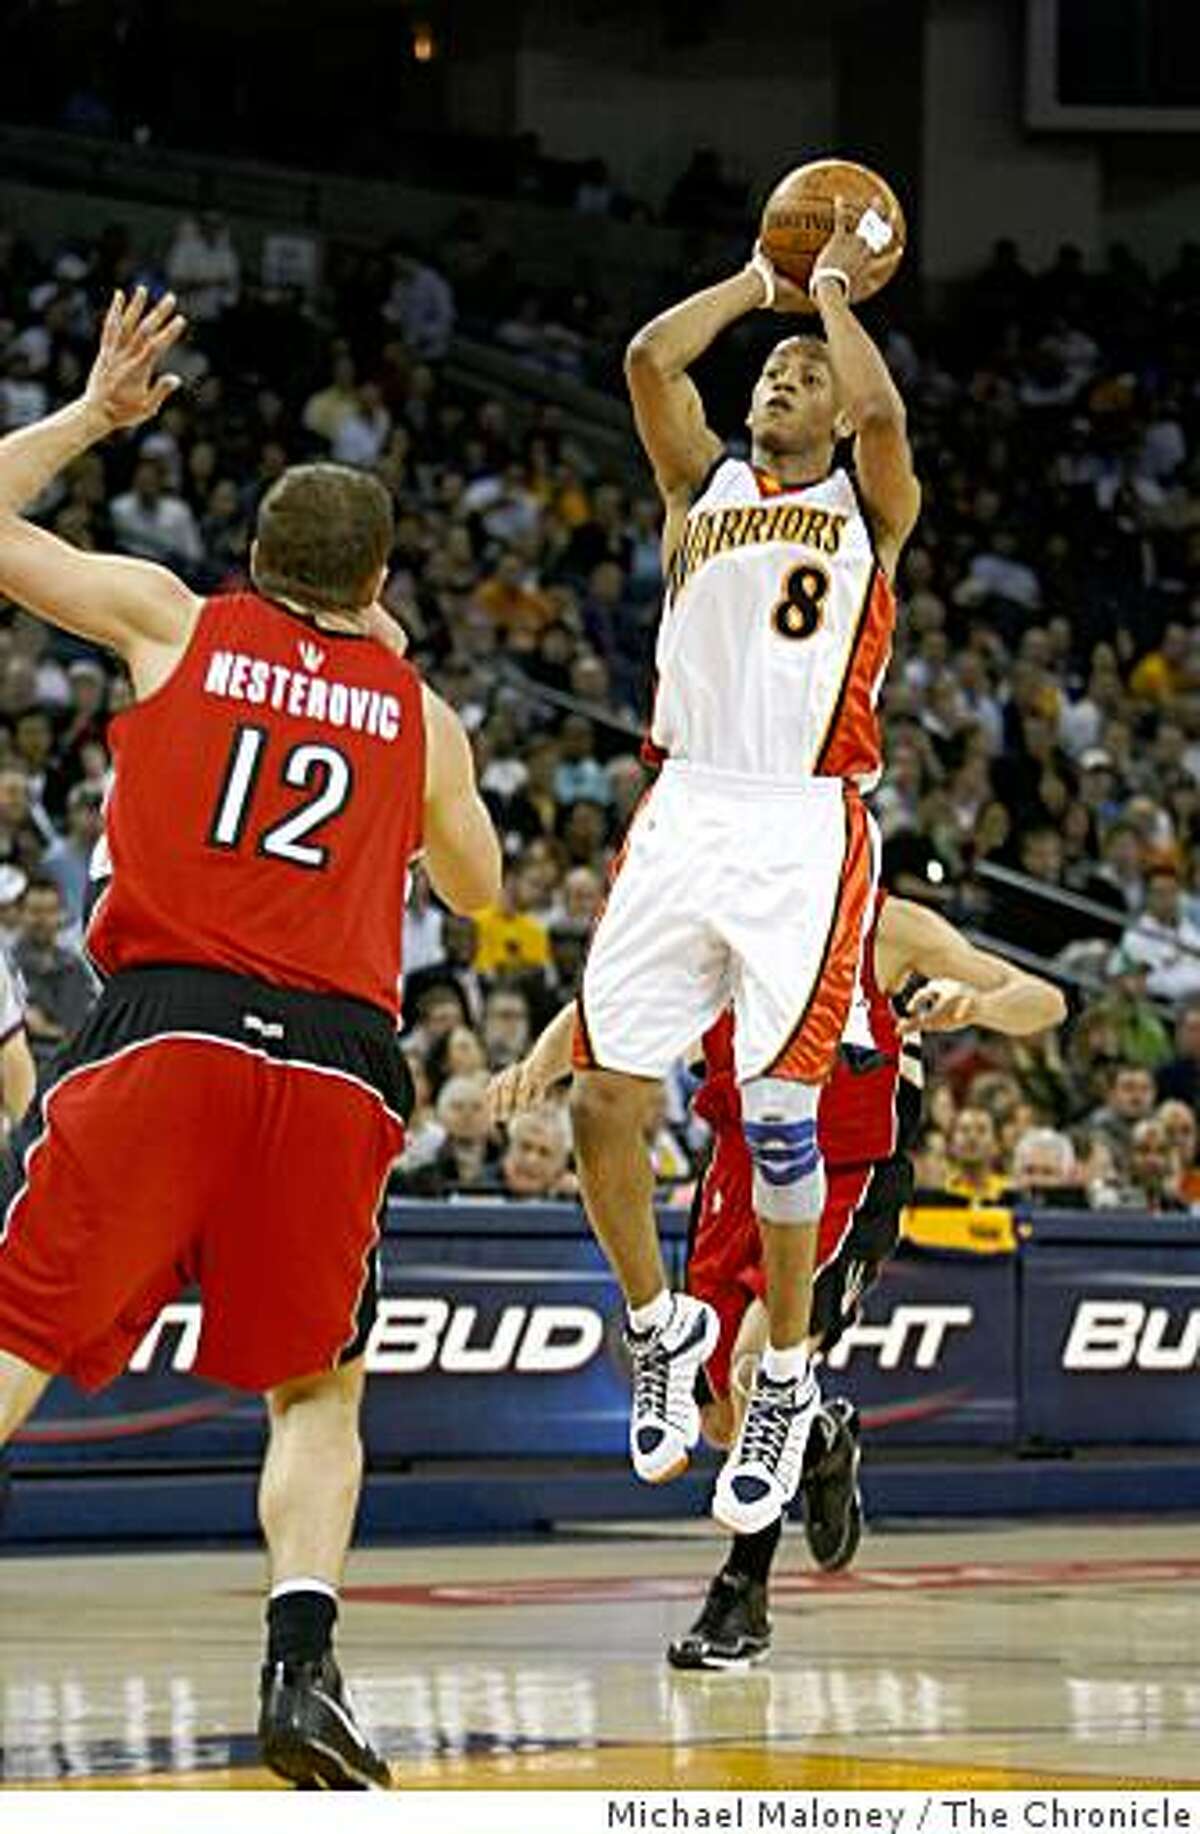 Golden State Warriors Monta Ellis (8) goes up for a basket against Toronto Raptors Rasho Nesterovic (12) in the 1st half.The Golden State Warriors host the Toronto Raptors in a NBA game at Oracle Arena in Oakland, Calif., on March 12, 2008.Photo by Michael Maloney / San Francisco Chronicle